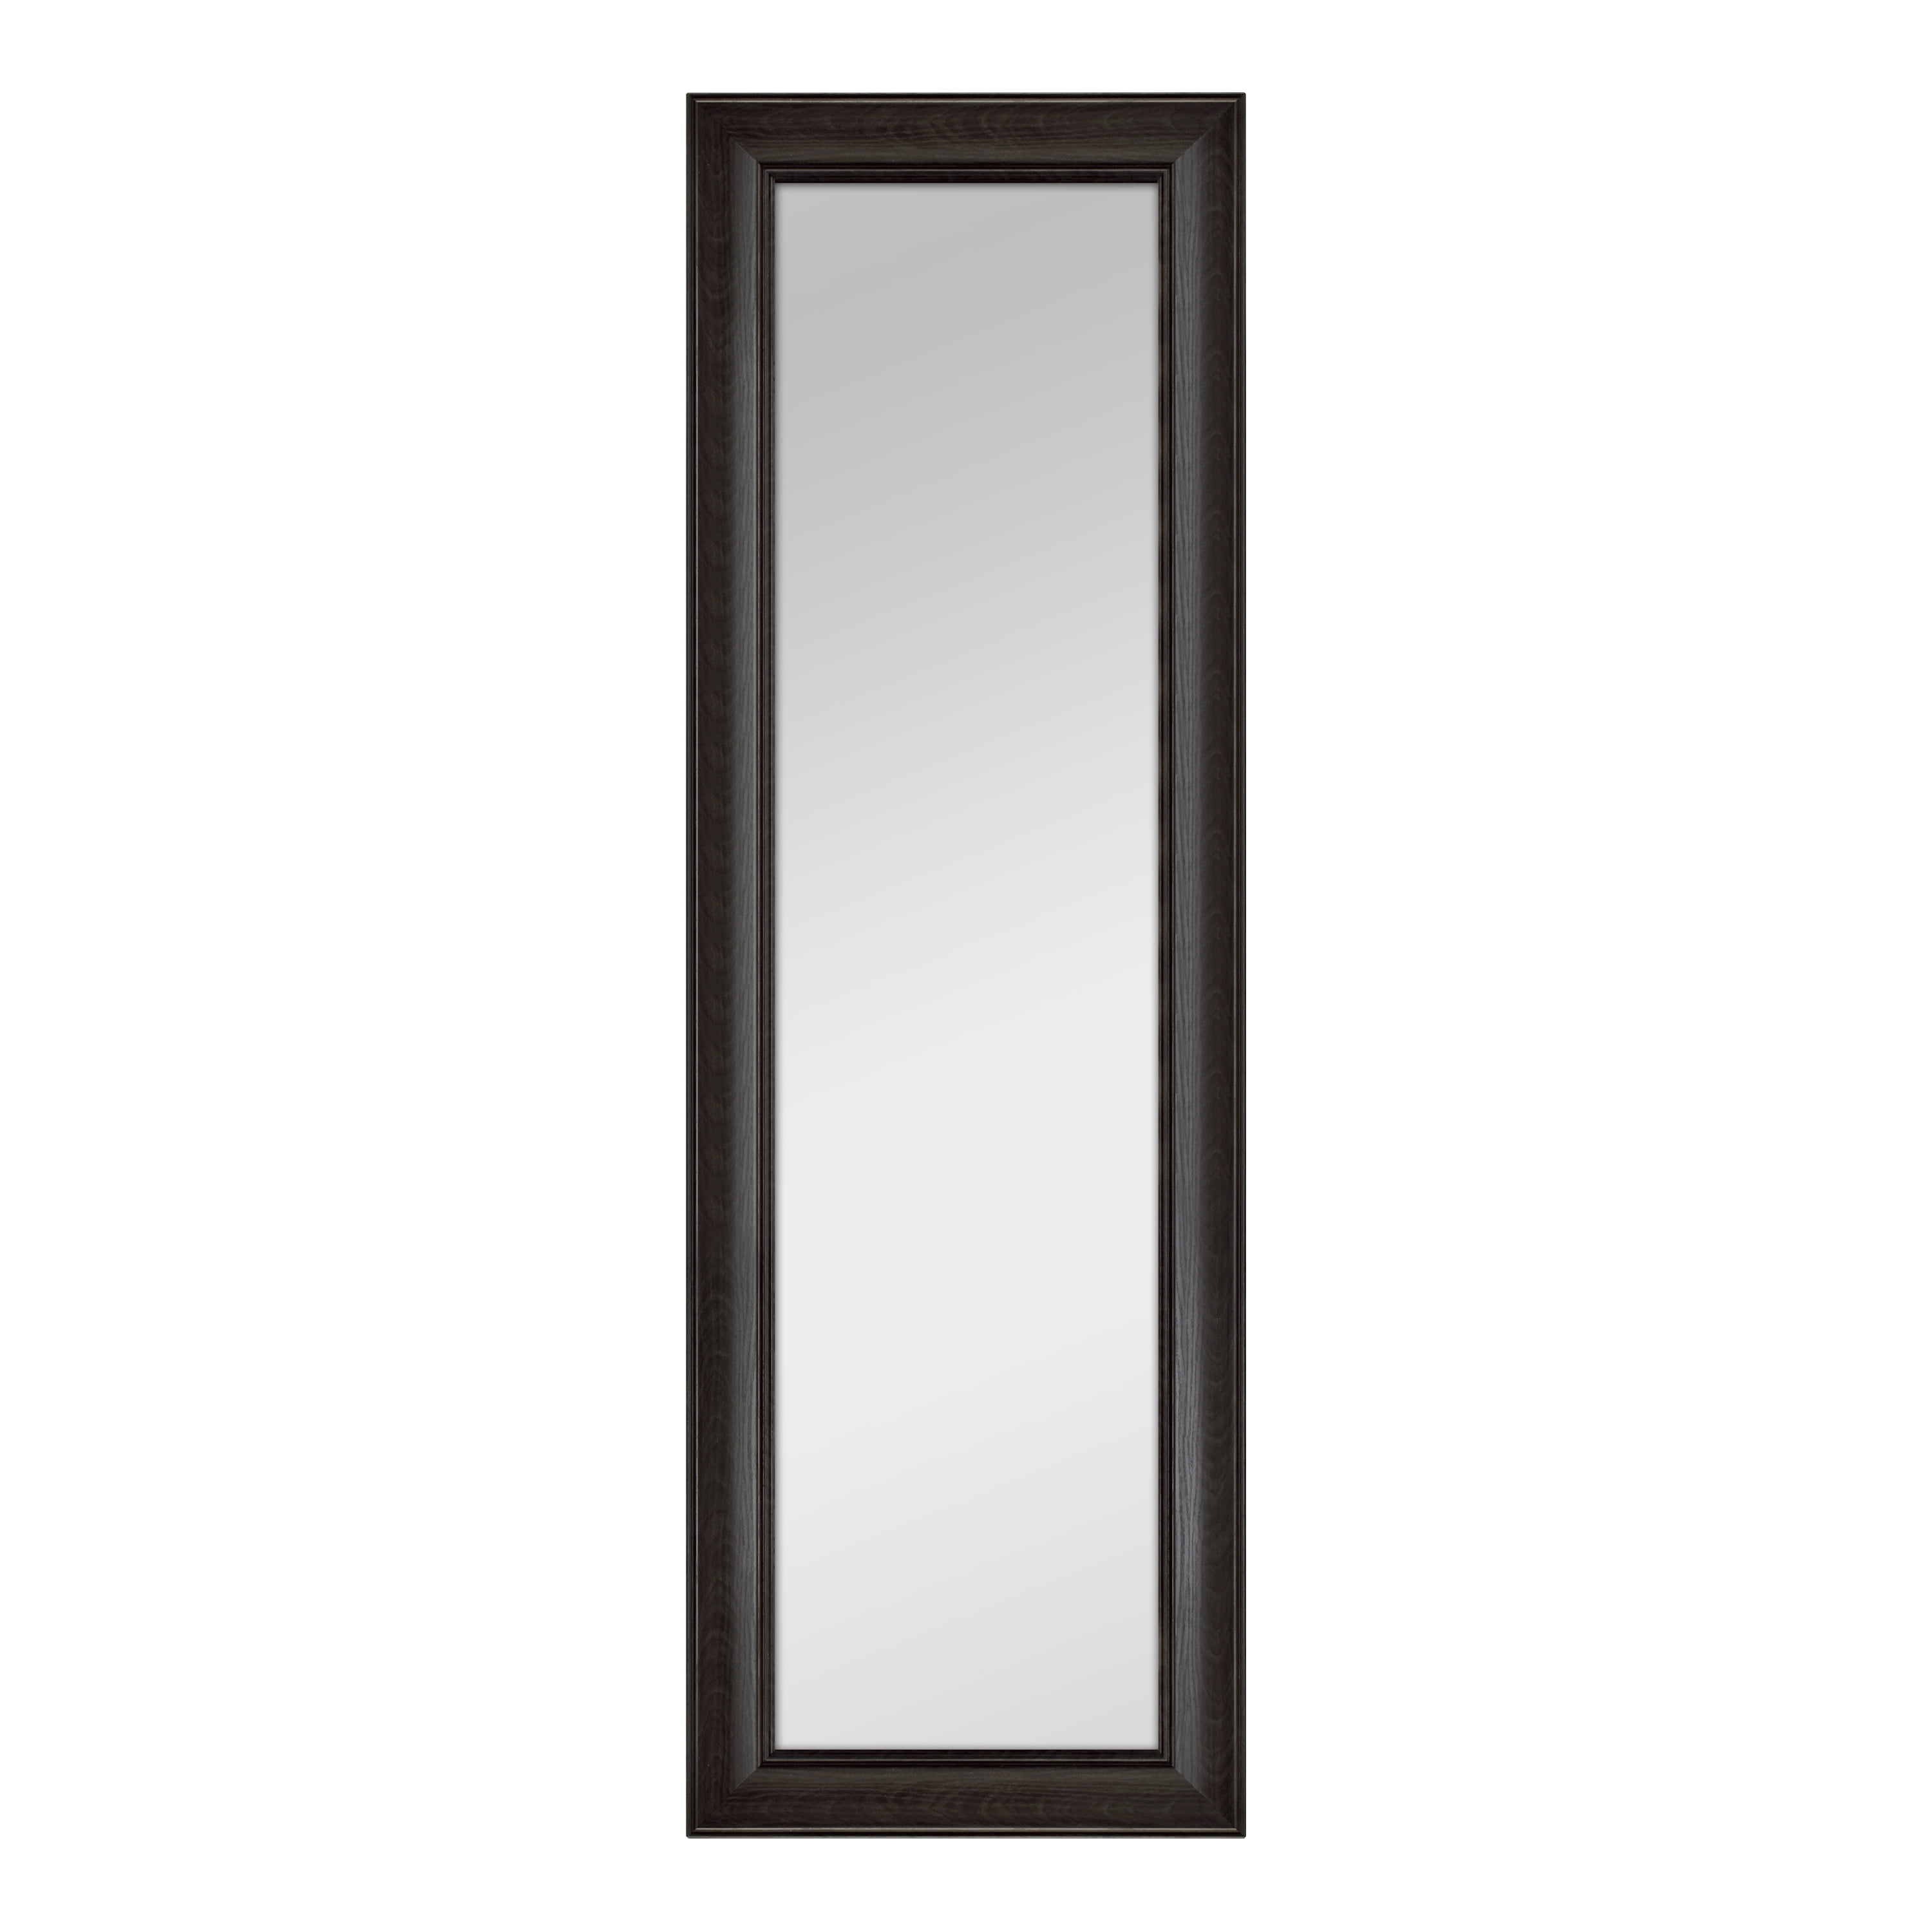 Better Homes & Gardens Over-the-Door Mirror with Hardware, 17X53 IN, Black Finish